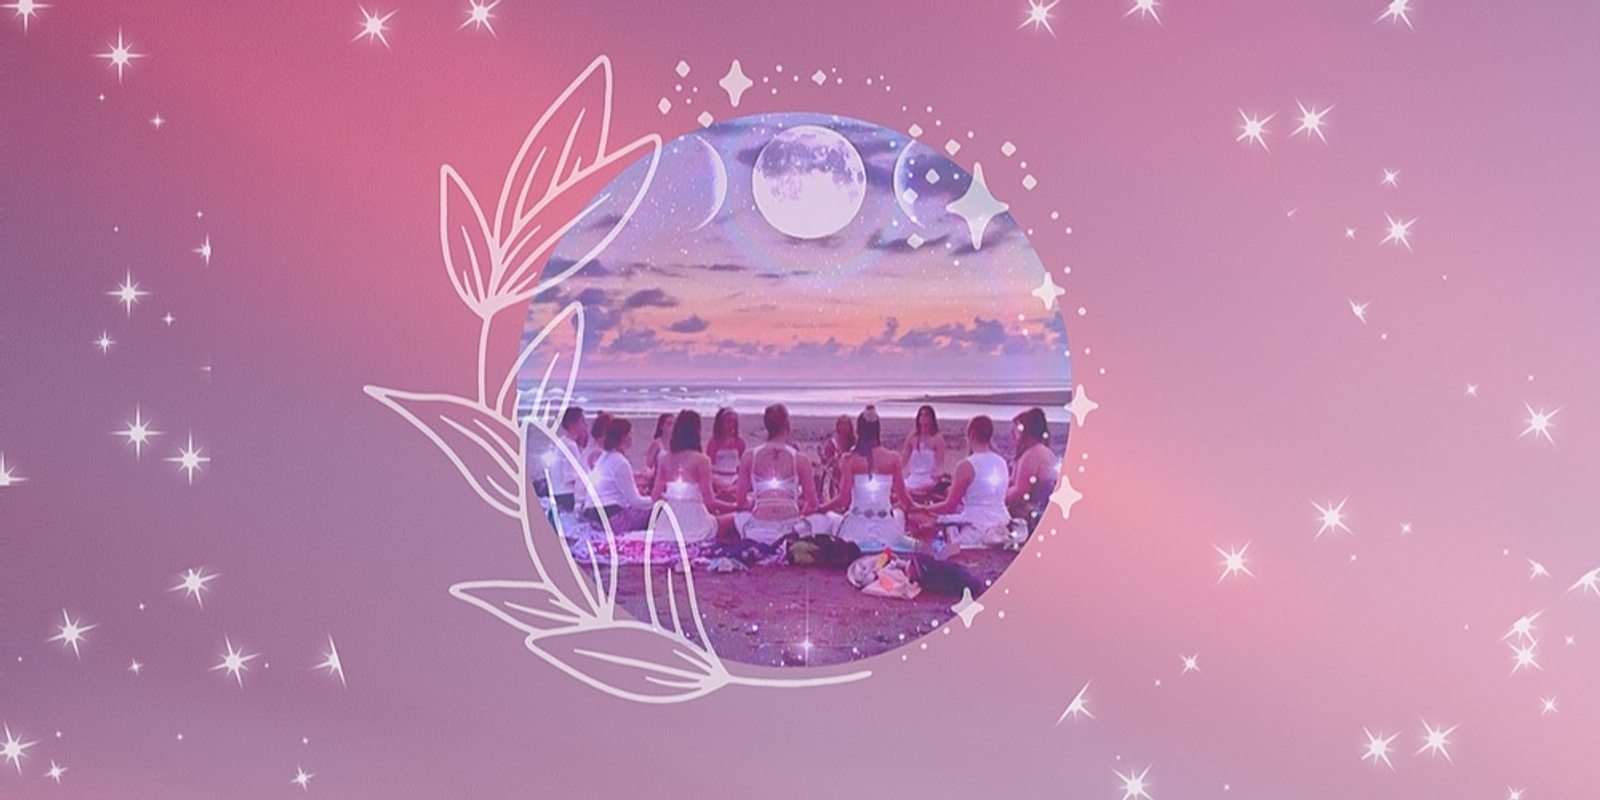 Banner image for New Moon Women's Circle